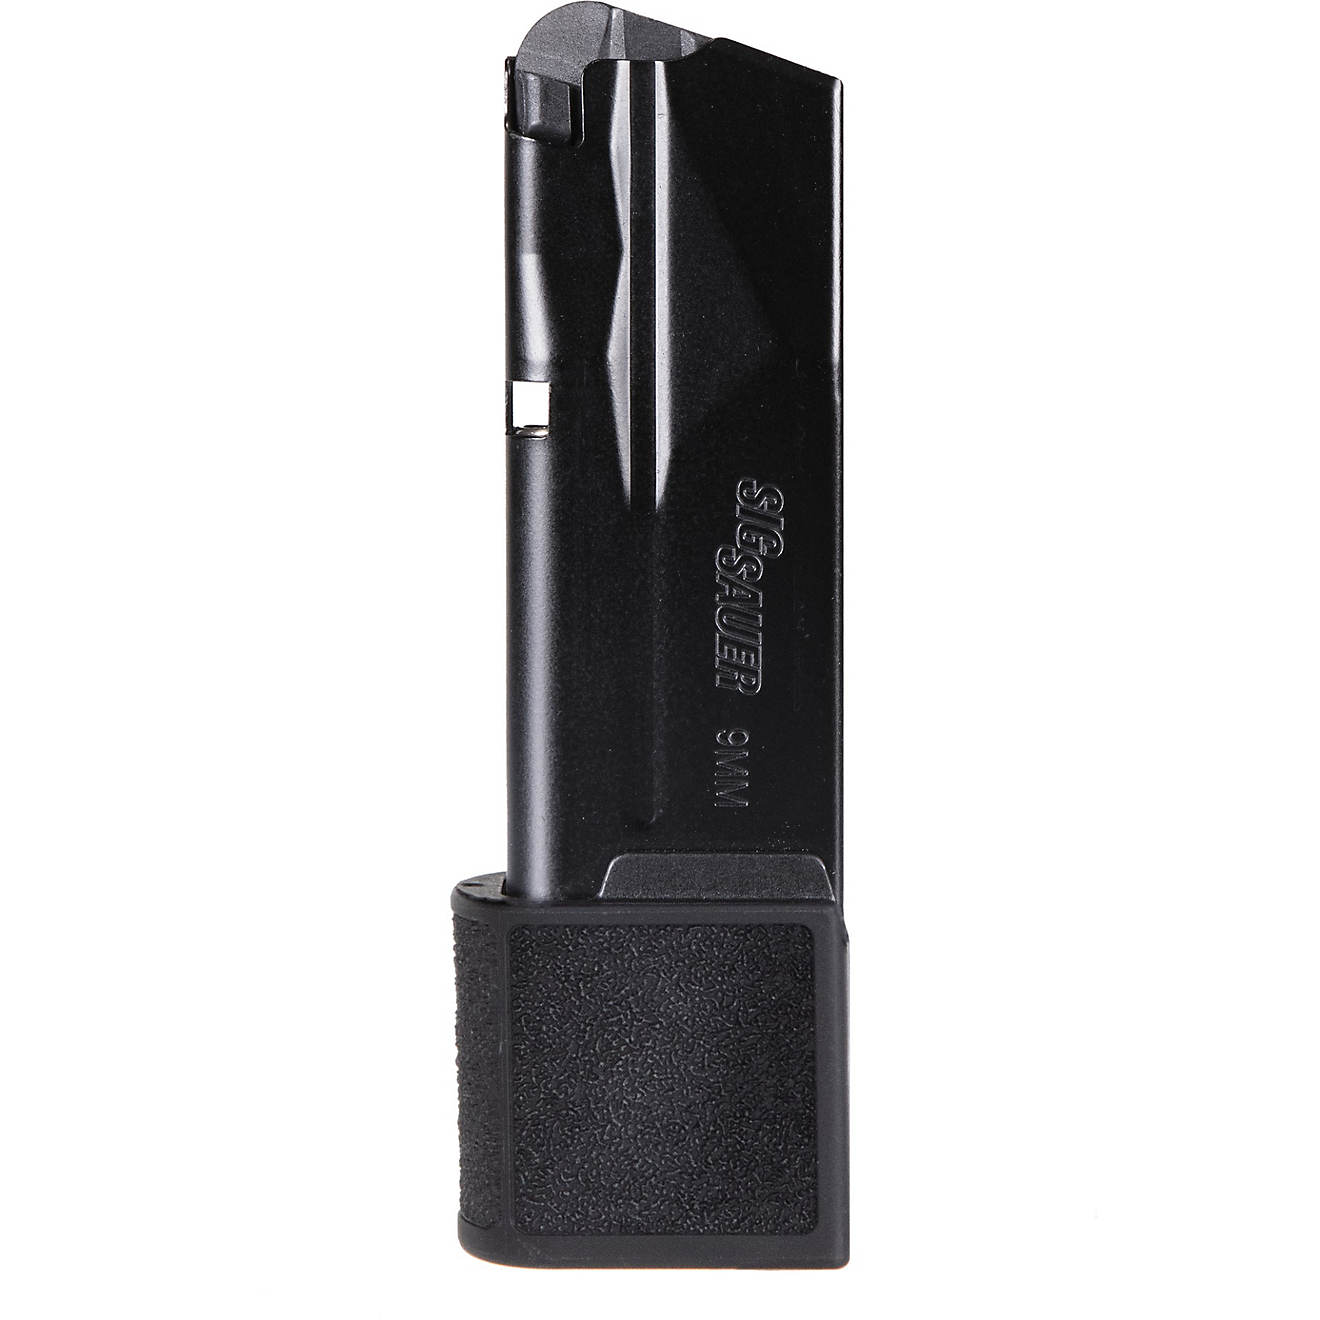 SIG SAUER P365 Micro Compact 15-Round 9mm Magazine                                                                               - view number 1